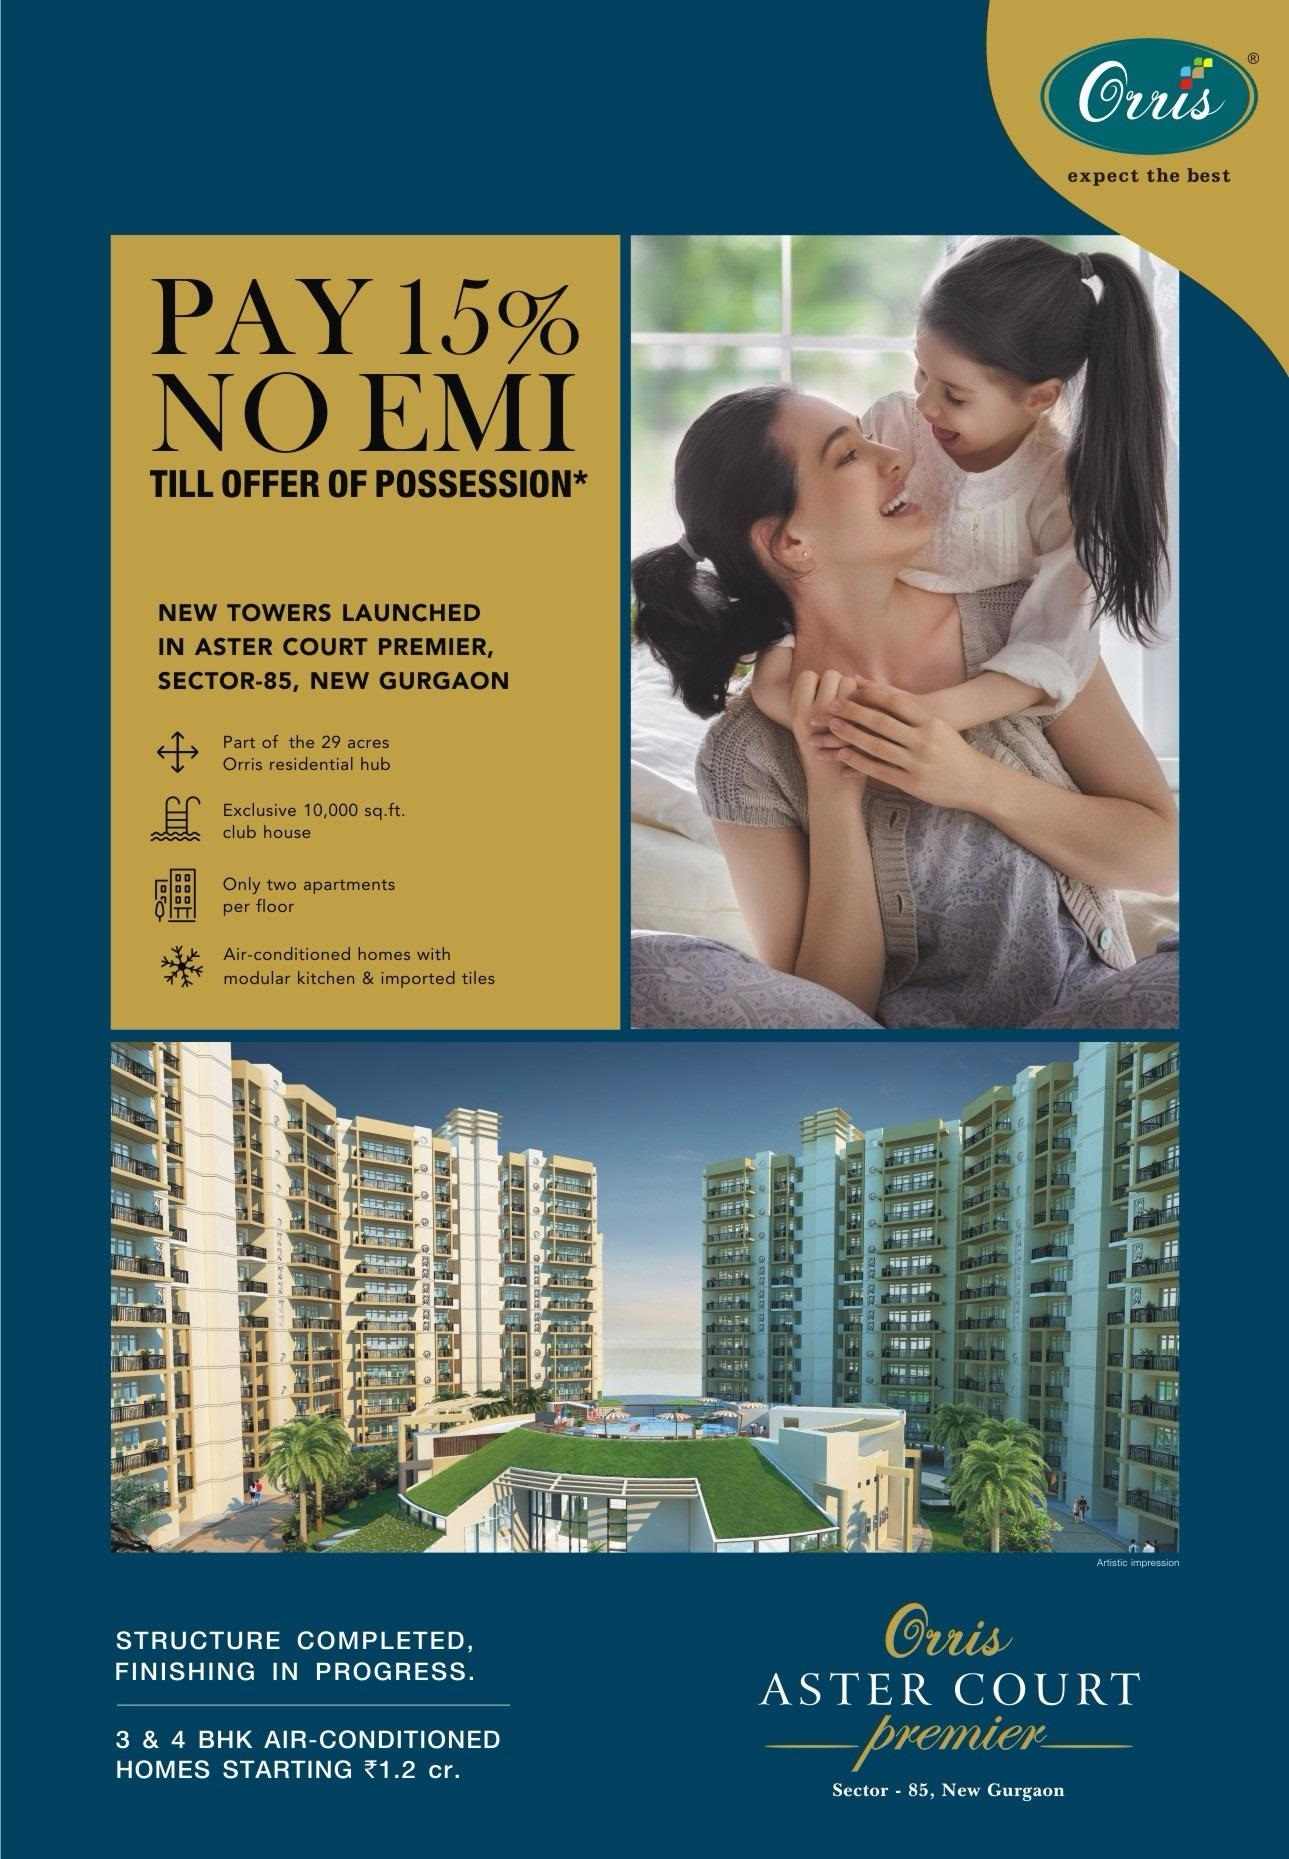 Buy 3 & 4 BHK air conditioned homes starting @ 1.2 cr. by paying 15% with no EMI till possession at Orris Aster Court Premier Update